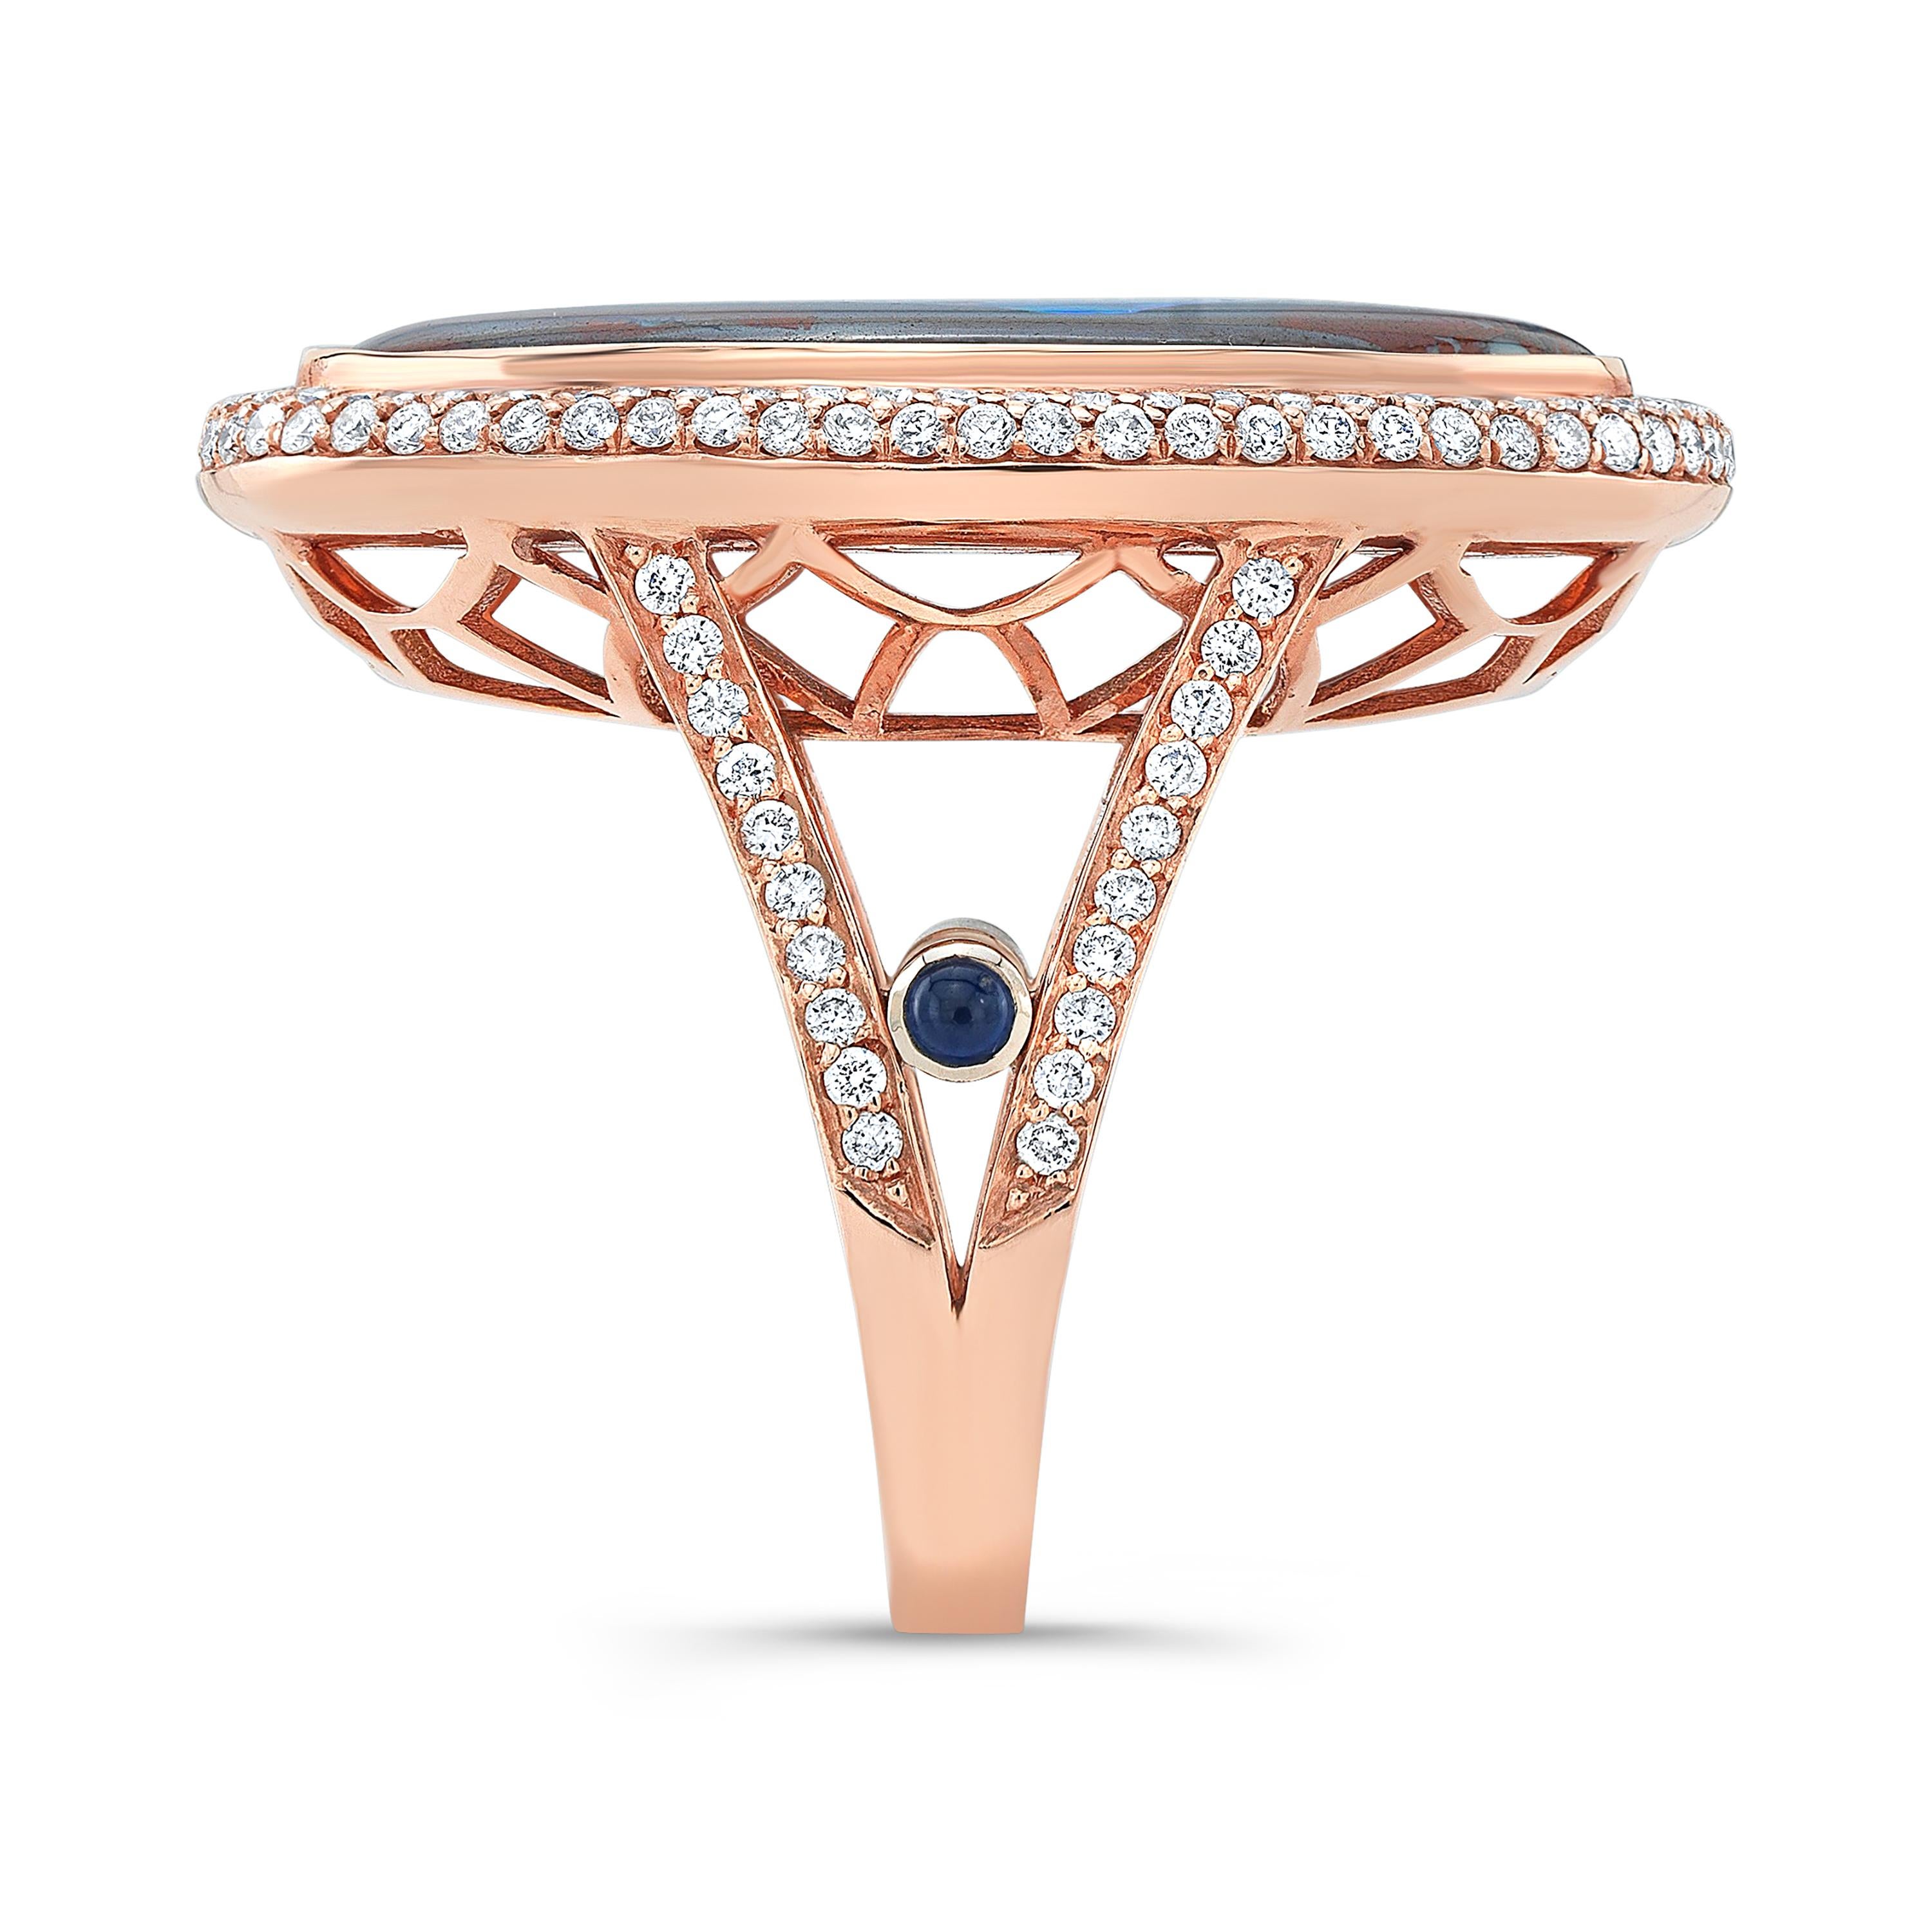 Amy Y’s 17.00ct. Australian Yowah boulder opal, diamond and sapphire 18K rose gold diamond ring resonates modern & timeless object d’art for the discerning collector. Handmade by Amy's expert European artisans is this truly stunning one-of-a-kind